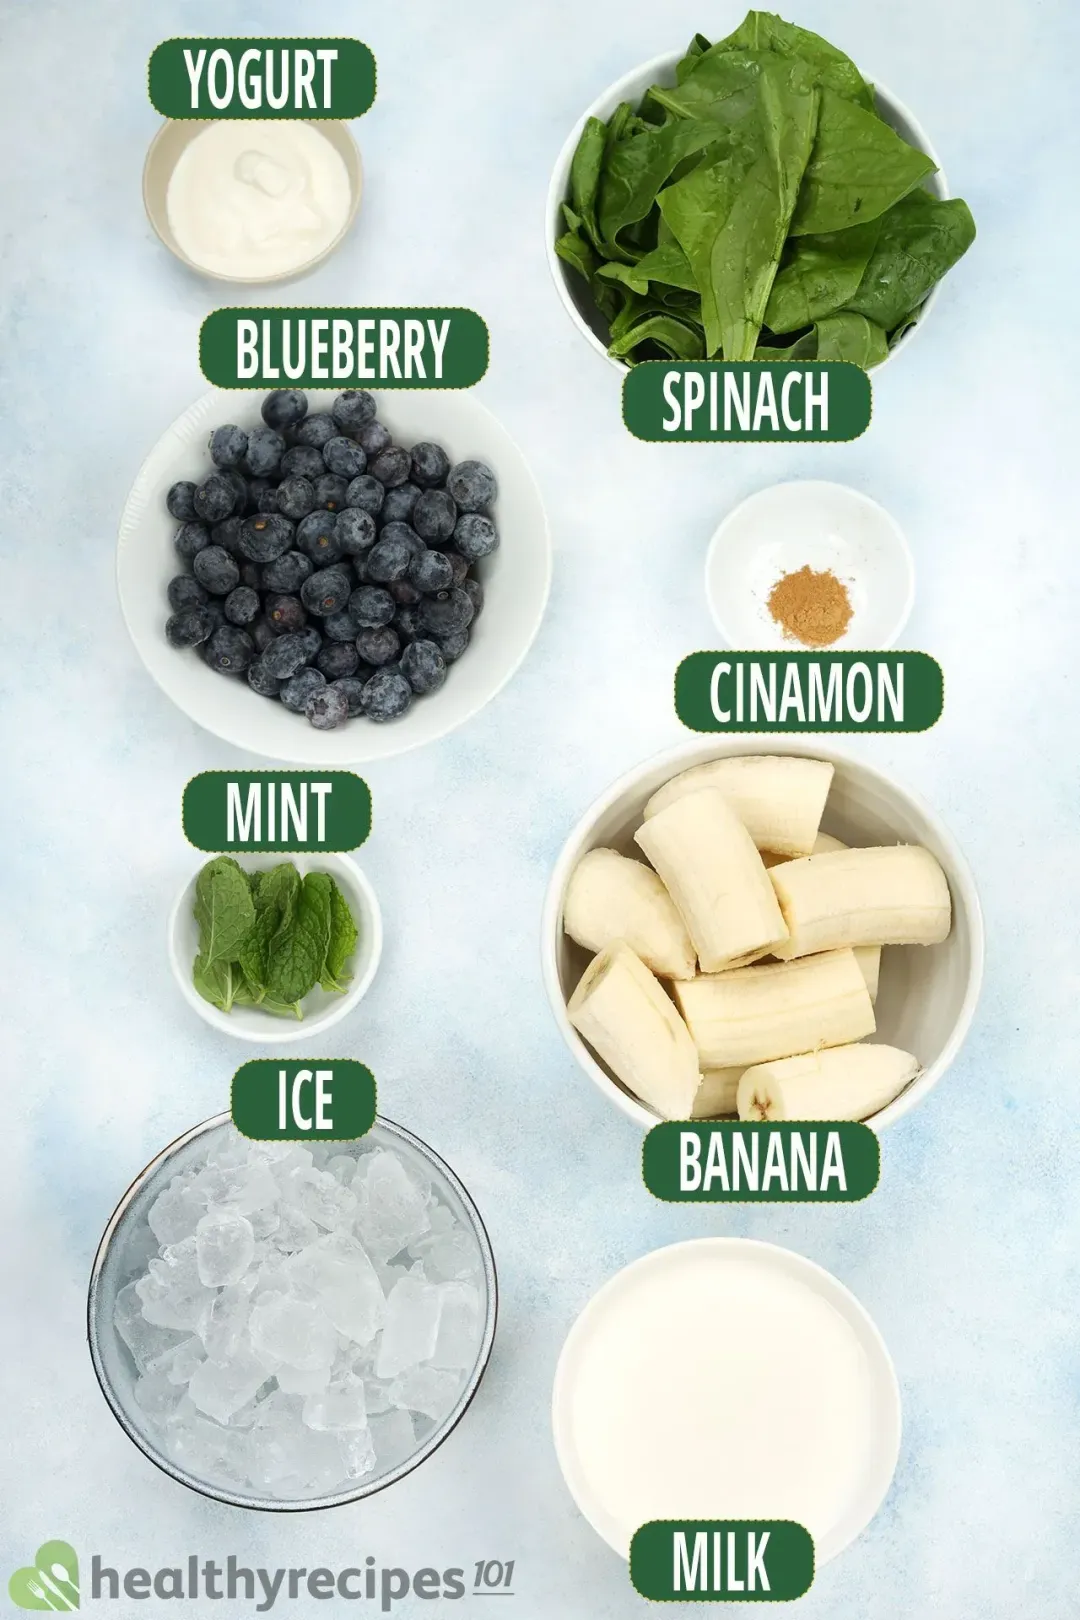 Ingredients for Blueberry Spinach Smoothie